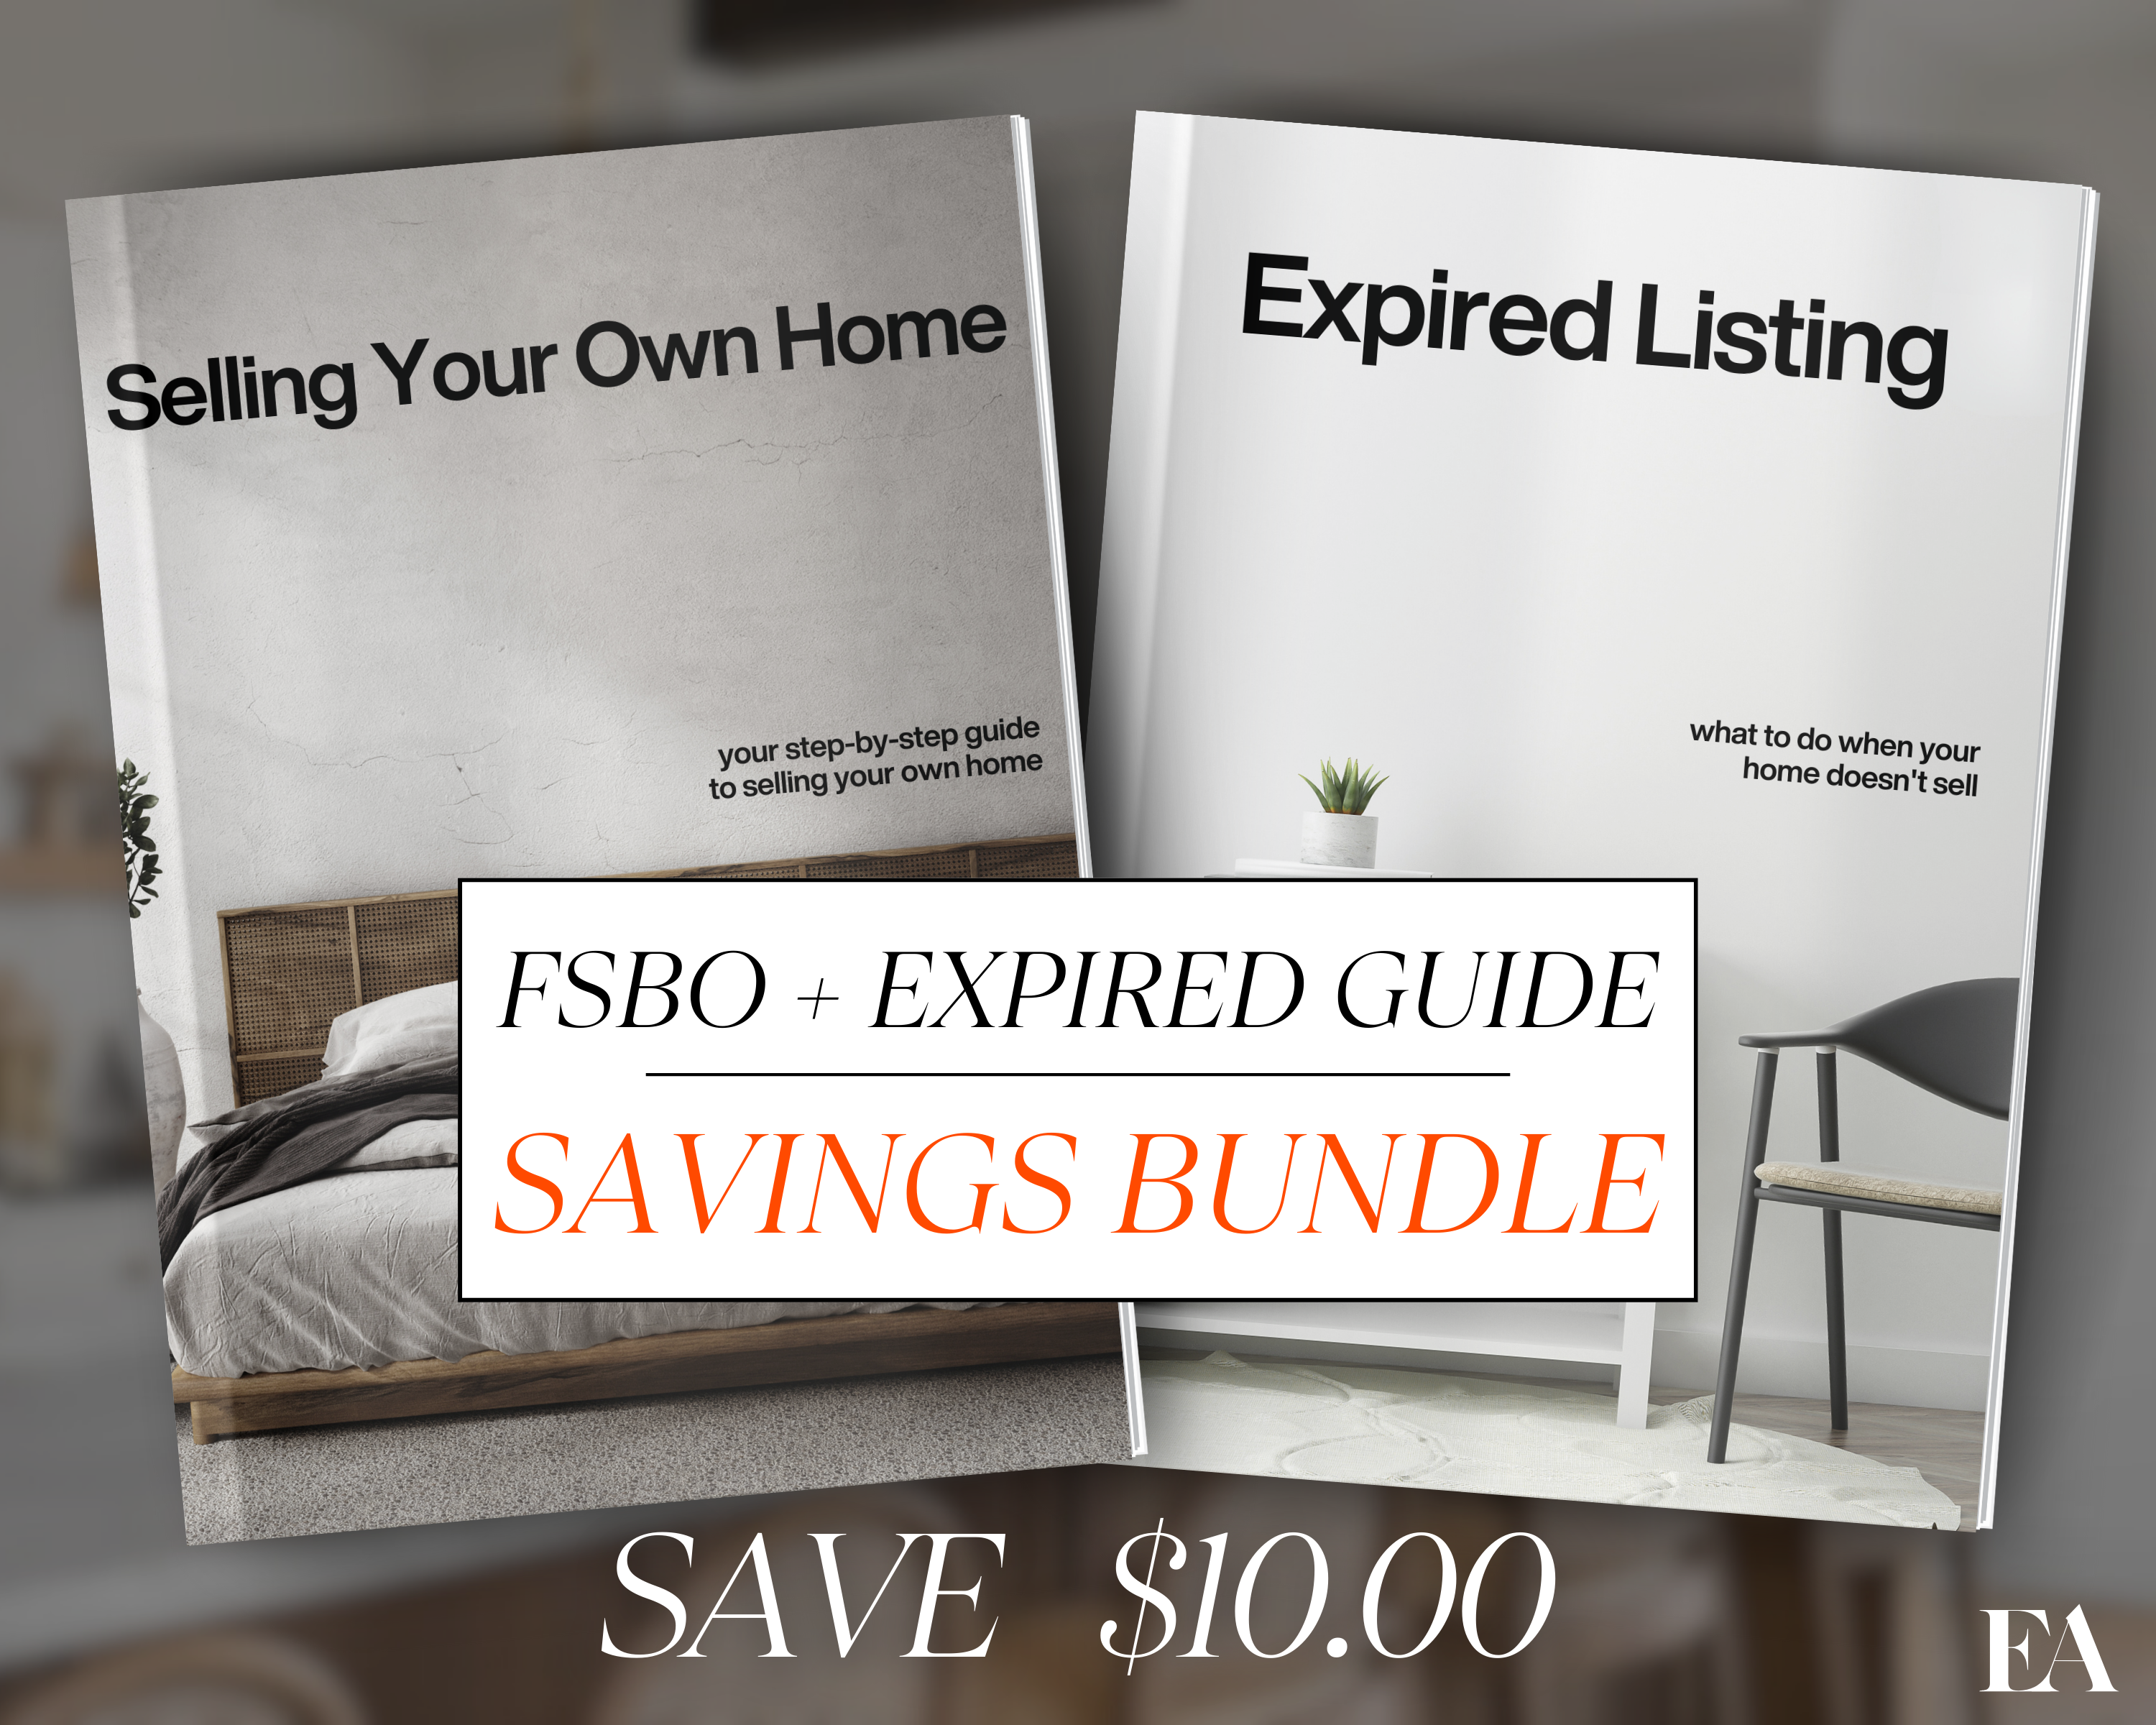 FSBO and Expired Guide Bundle, For Sale By Owner, Listing Presentation, Expired Listing, FSBO Guide, FSBO Marketing, Real Estate Farming